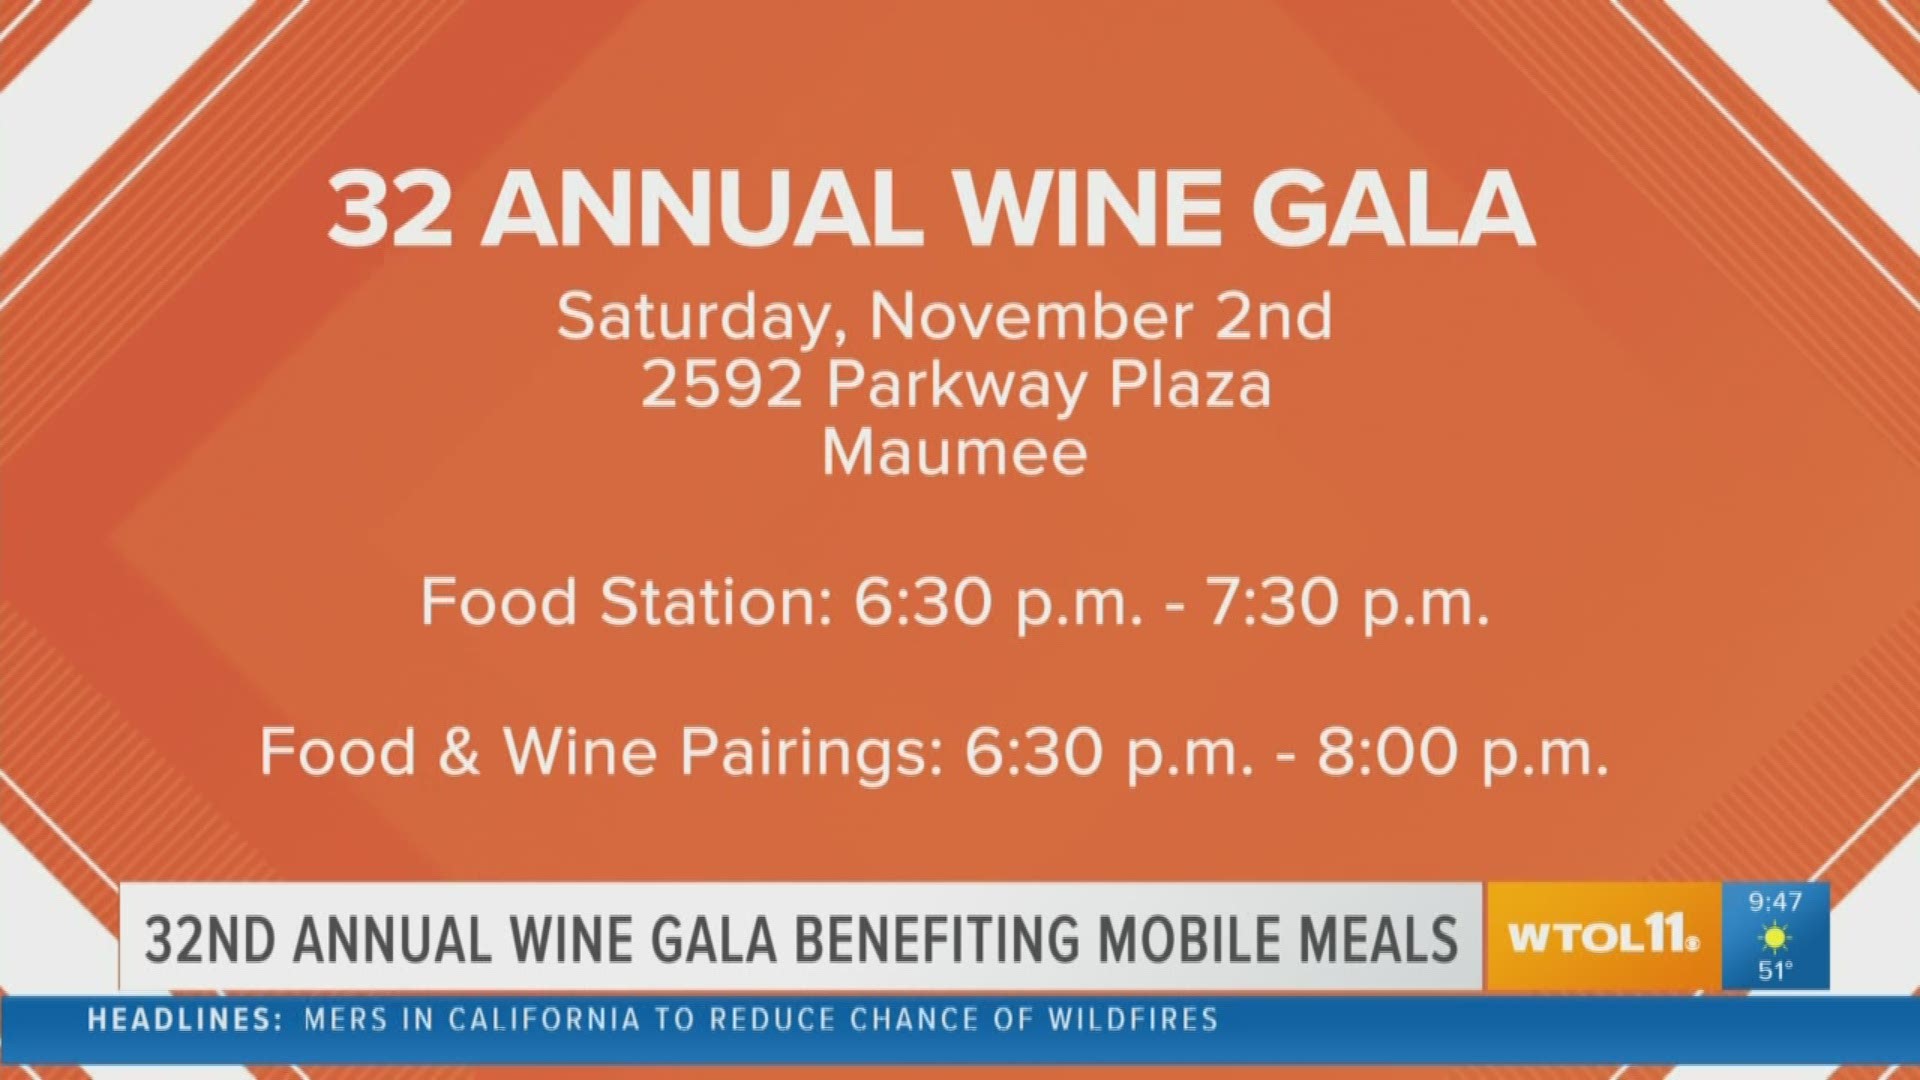 Enjoy a variety of food and wine in Maumee on Saturday, Nov. 2 all while helping a great cause.